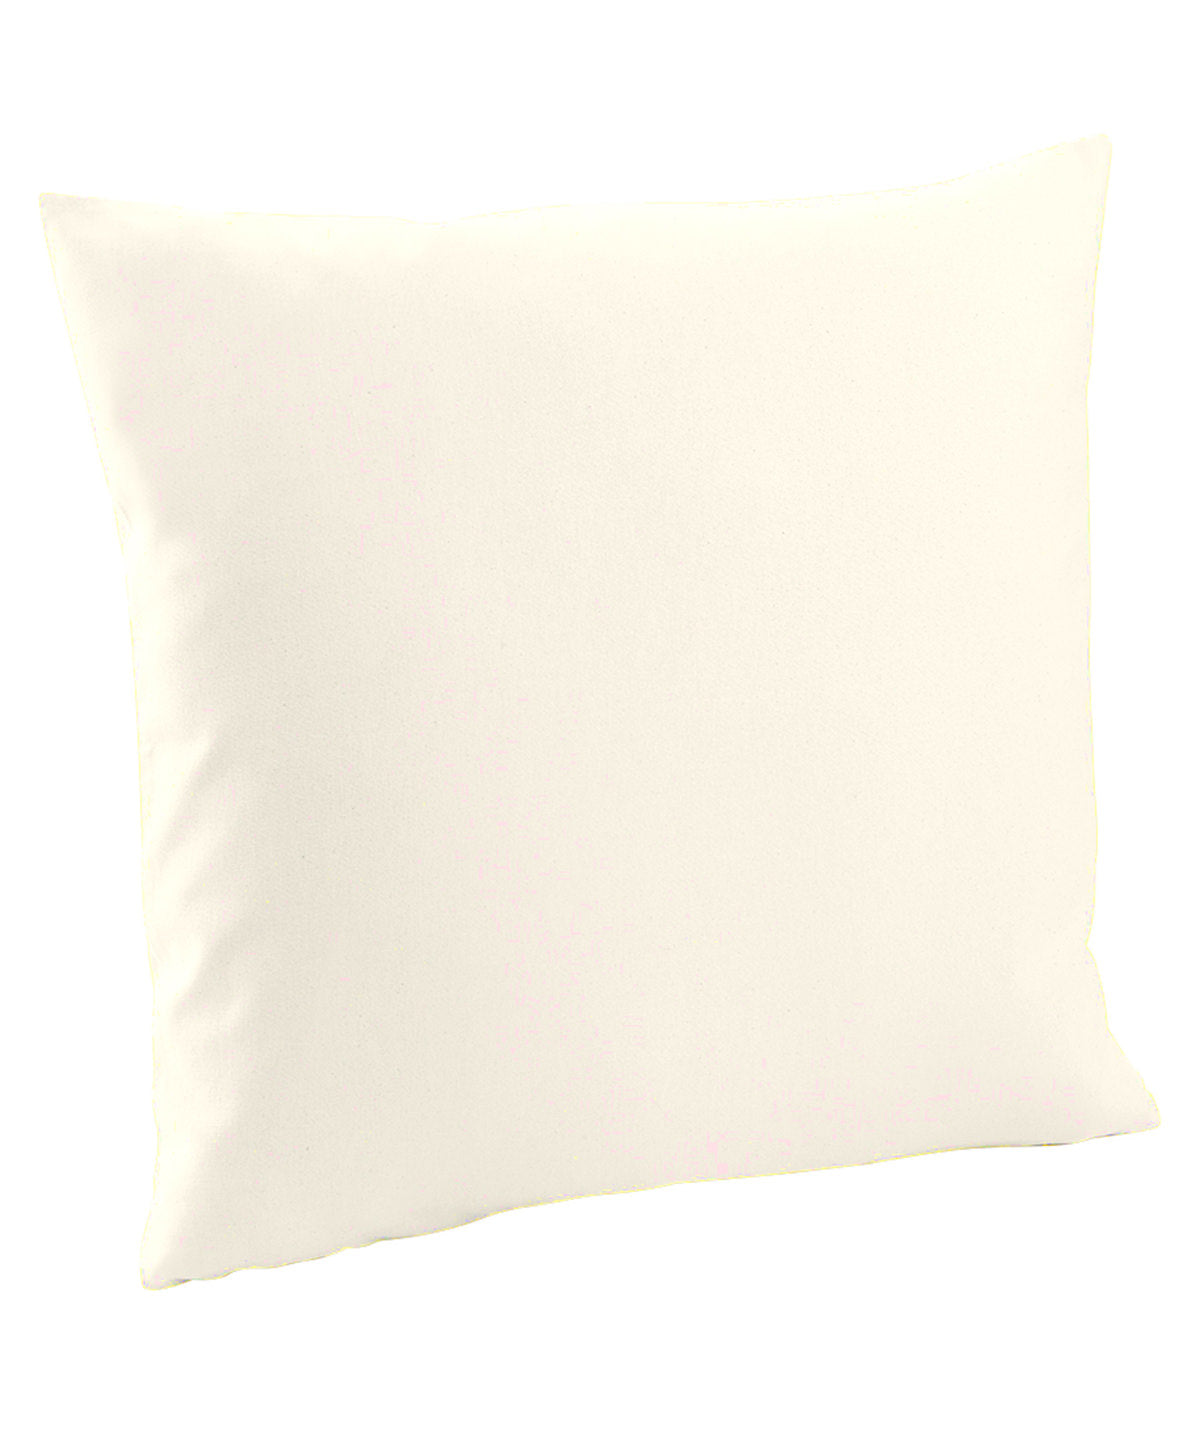 Design your Own Cotton Canvas Cushion Cover with Cushion